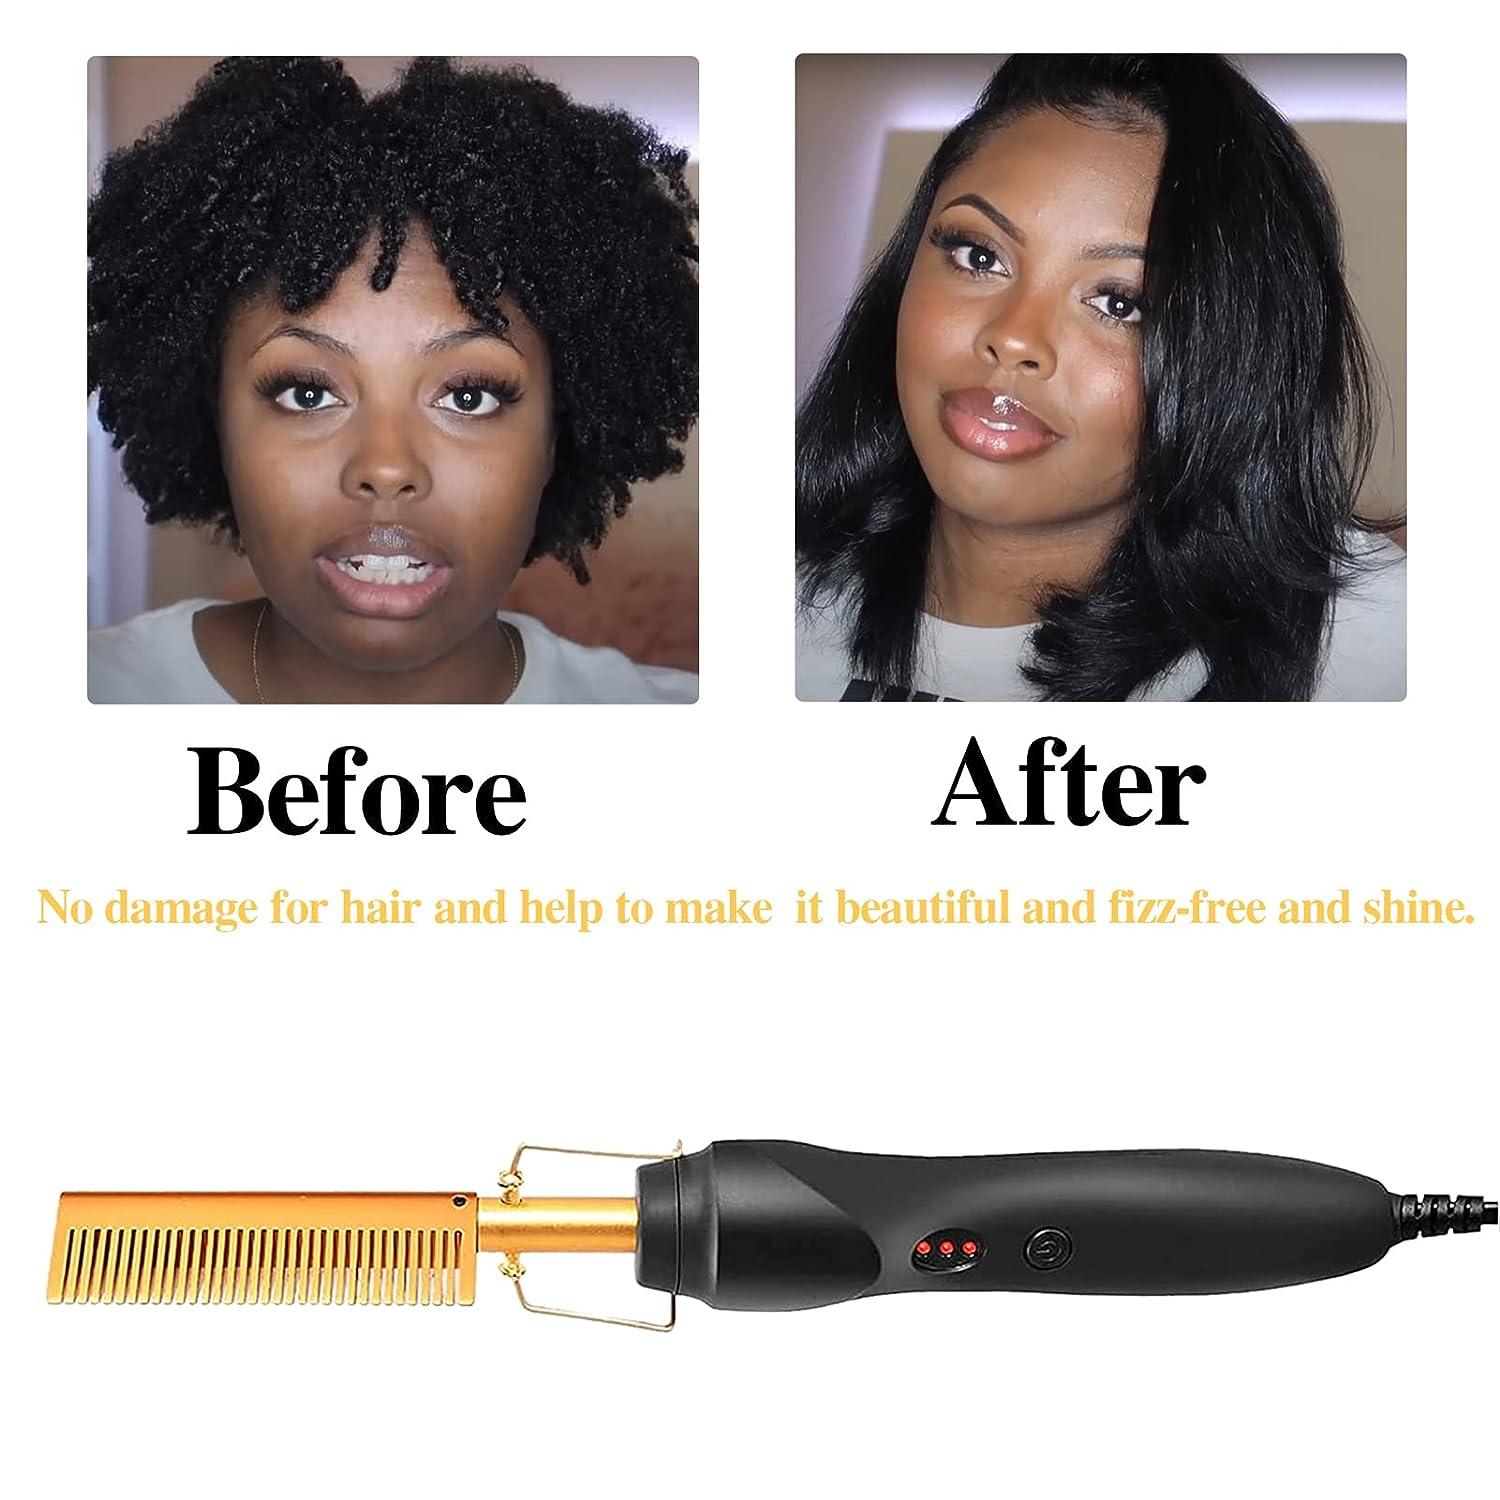 Electric Hot Comb Hair Straightener, Deluxe Electrical Straightening Comb  Curling Iron for Natural Black Hair Wigs